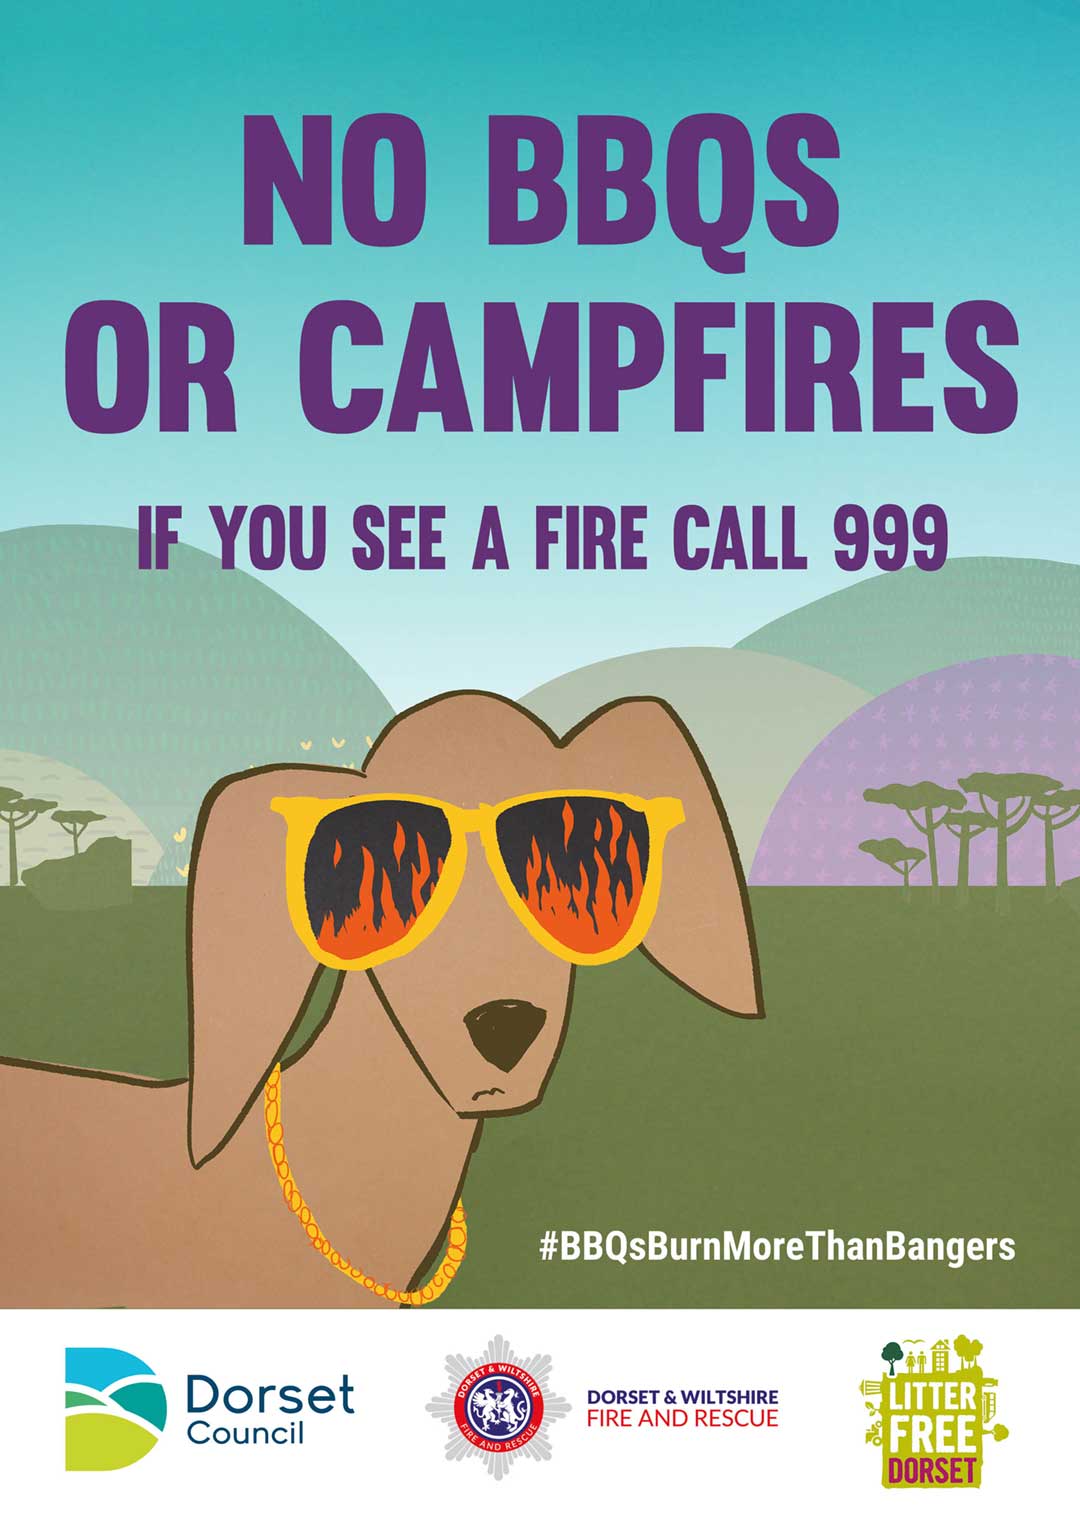 FIND OUT MORE ABOUT NO BBQS OR CAMPFIRE CAMPAIGN